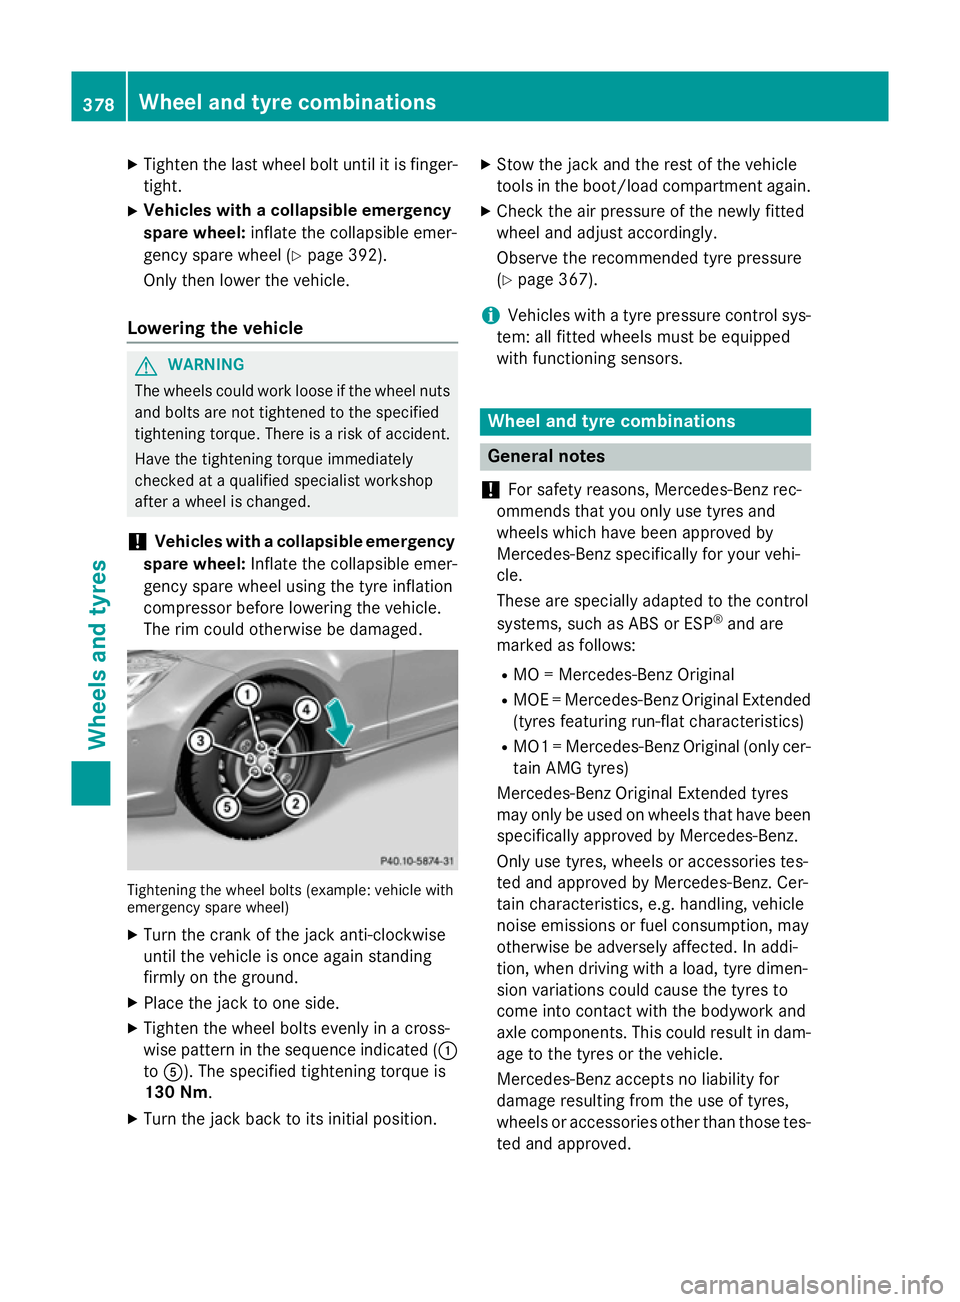 MERCEDES-BENZ CLS COUPE 2014  Owners Manual X
Tighten the last wheel bolt until it is finger-
tight.
X Vehicles with a collapsible emergency
spare wheel: inflate the collapsible emer-
gency spare wheel (Y page 392).
Only then lower the vehicle.